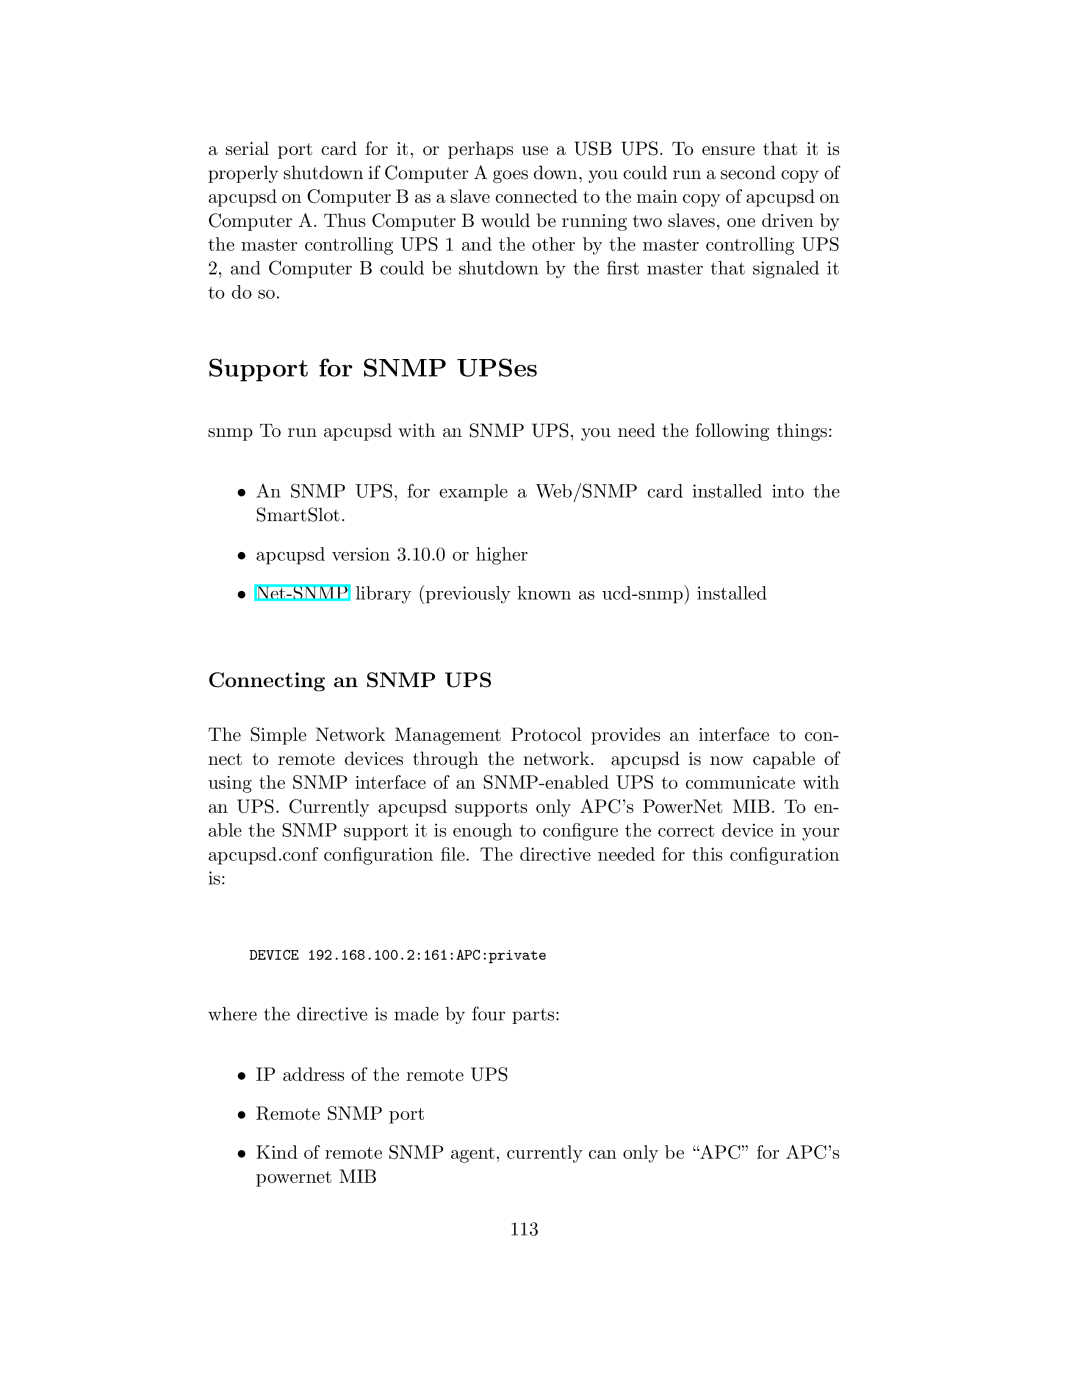 APC UPS control system manual Support for Snmp UPSes, Connecting an Snmp UPS 